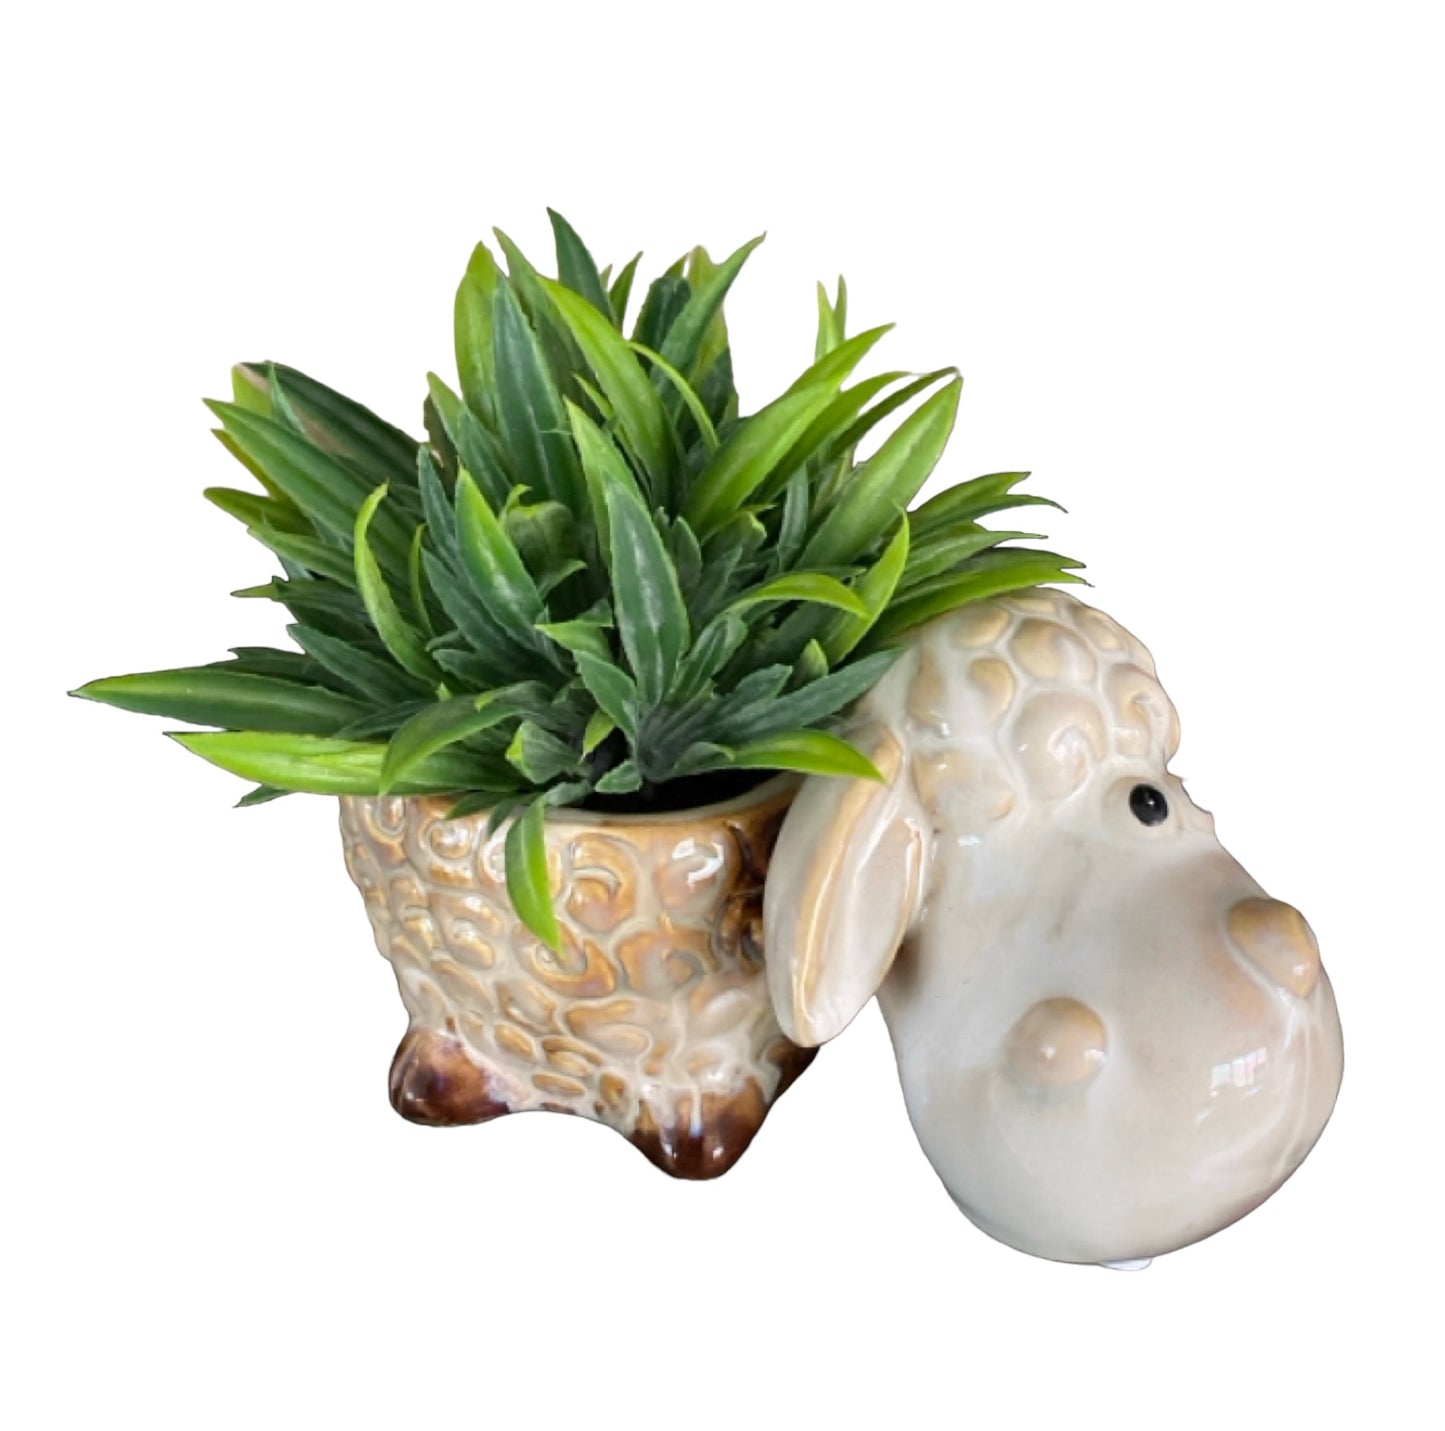 Sheep Country Pot Plant Garden - The Renmy Store Homewares & Gifts 